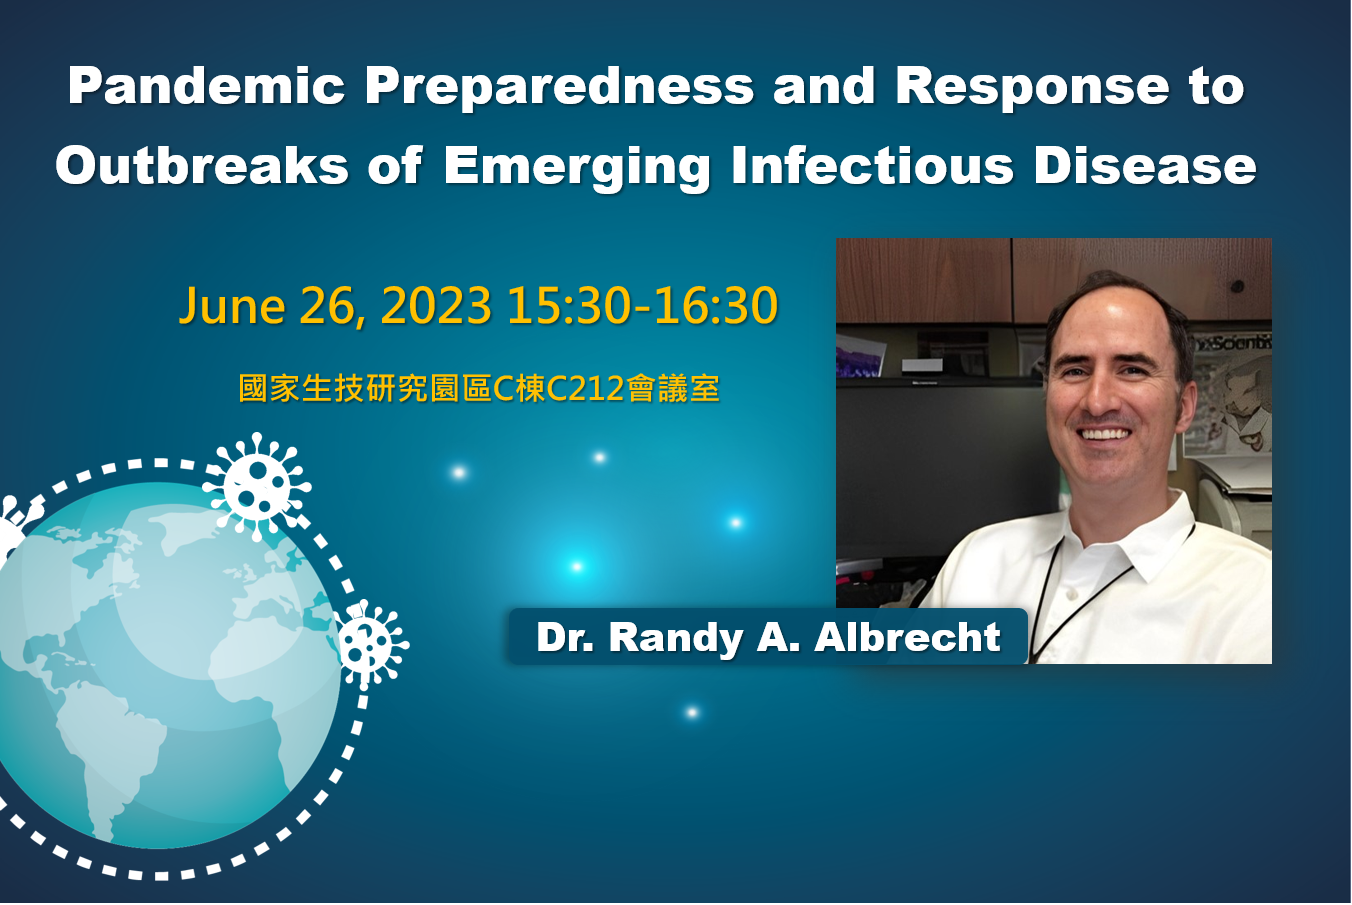 Pandemic Preparedness and Response to Outbreaks of Emerging Infectious Disease